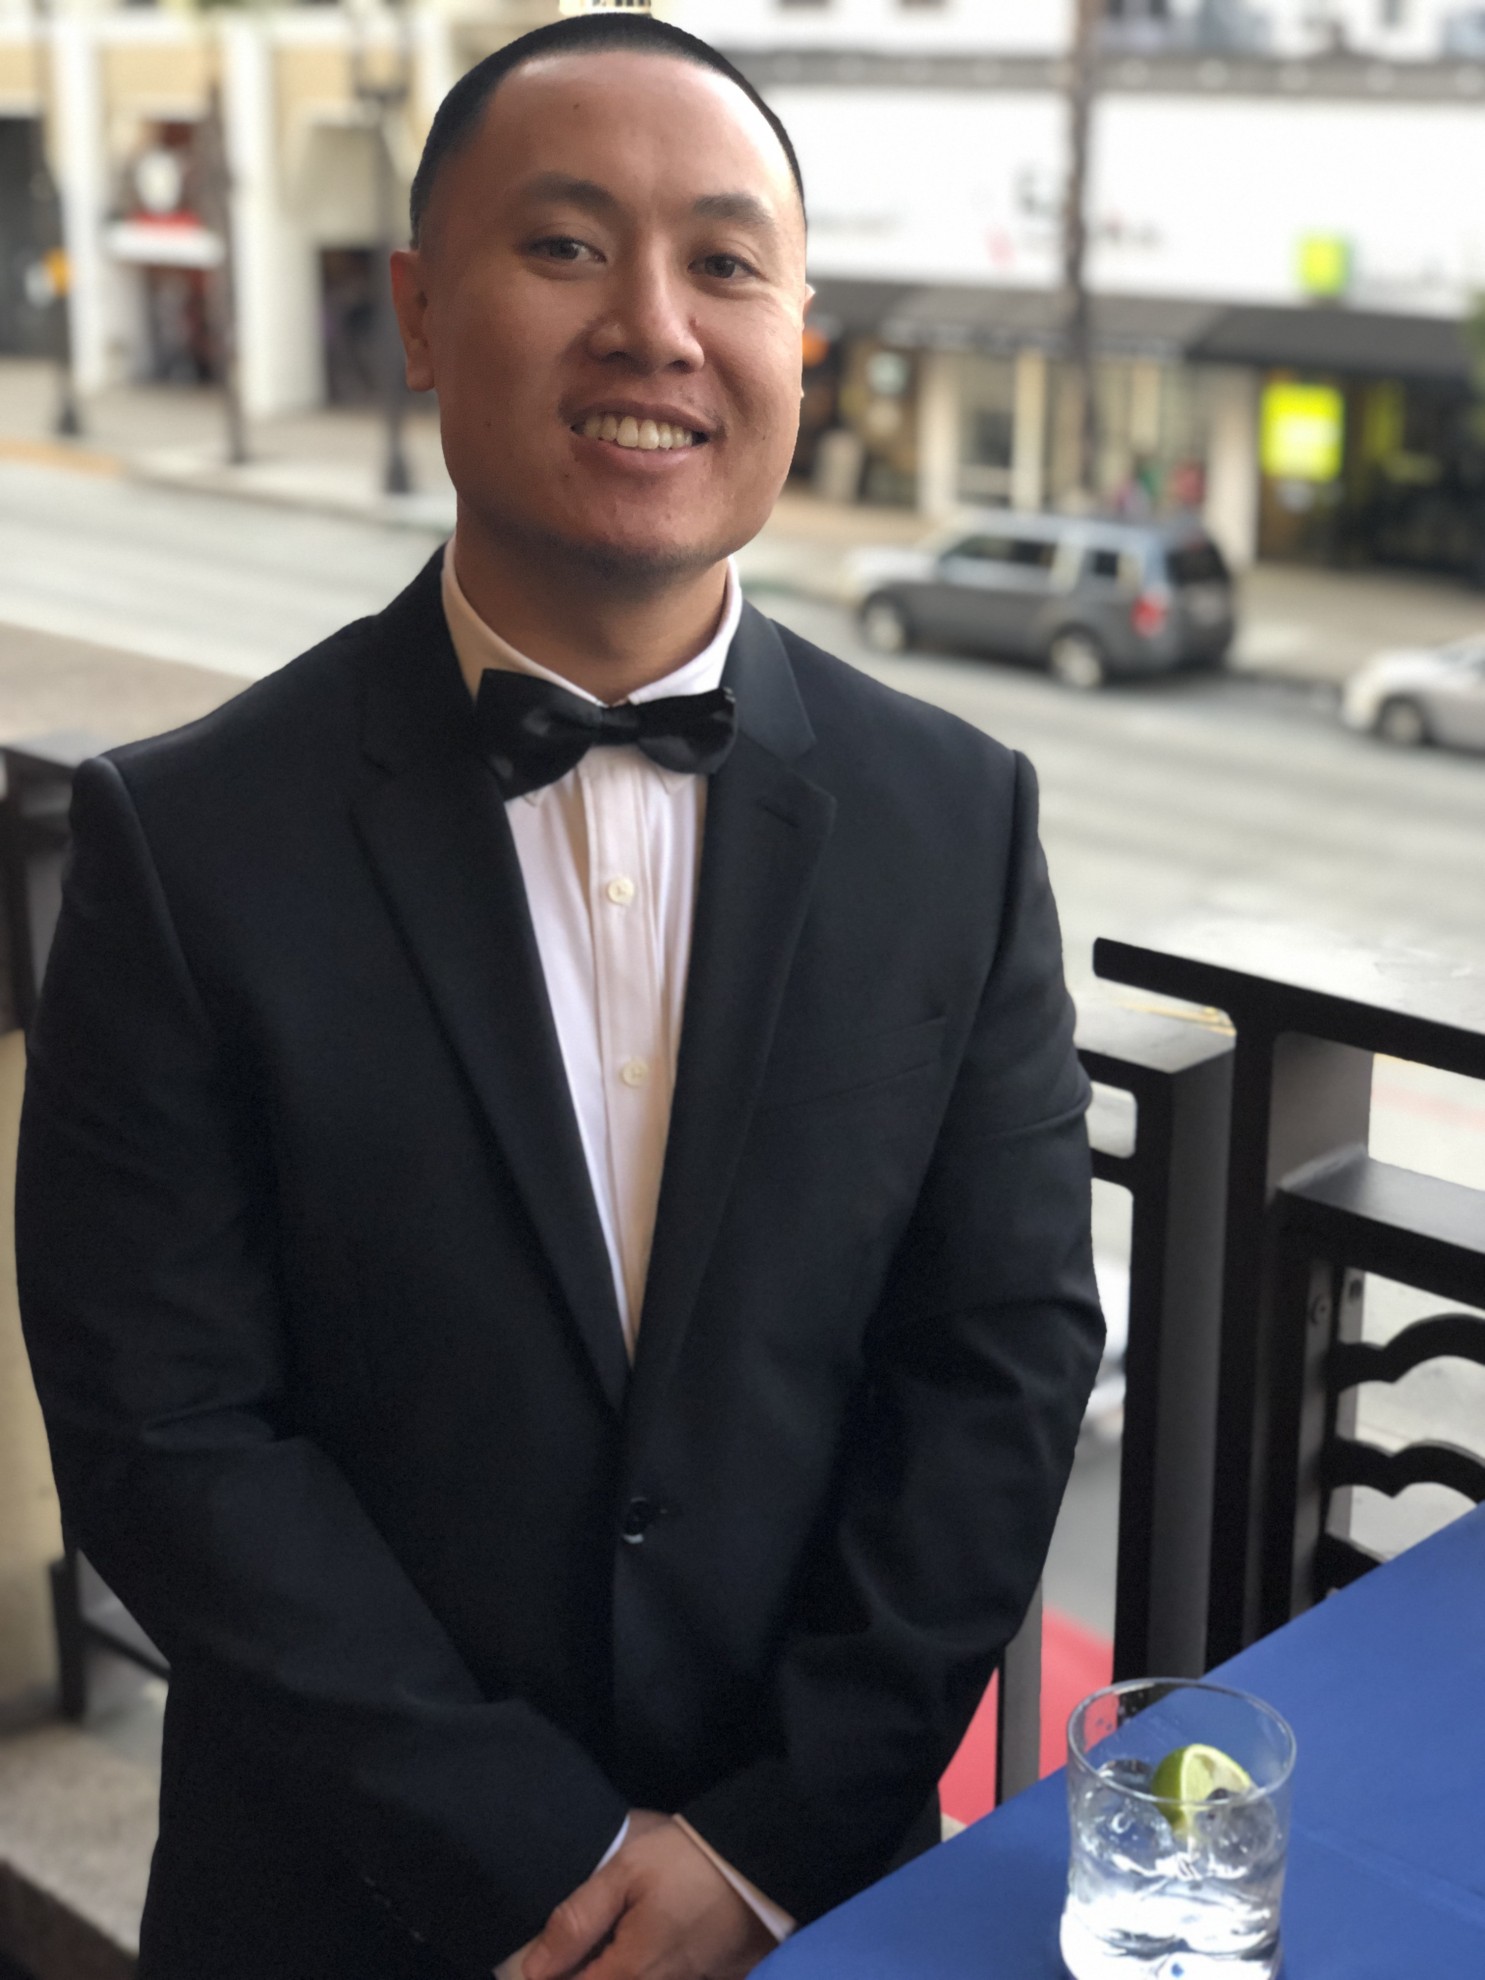 10 Questions with Michael Nguyen